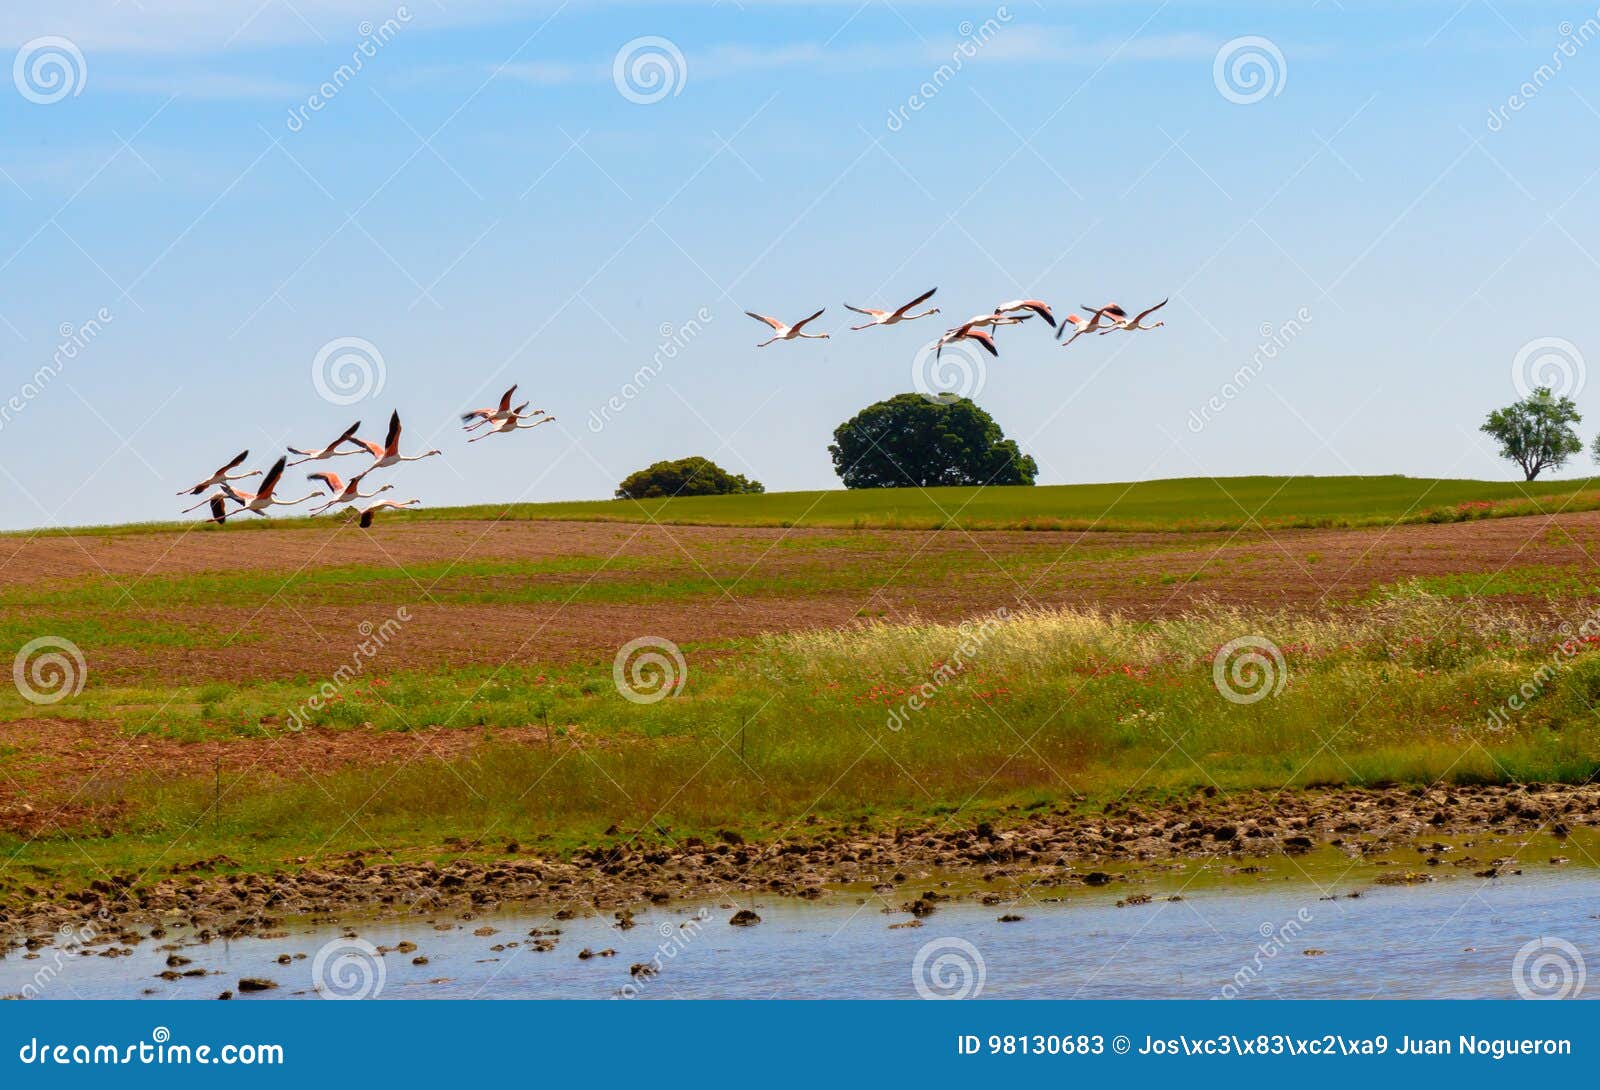 flamingos taking off from the lagoon